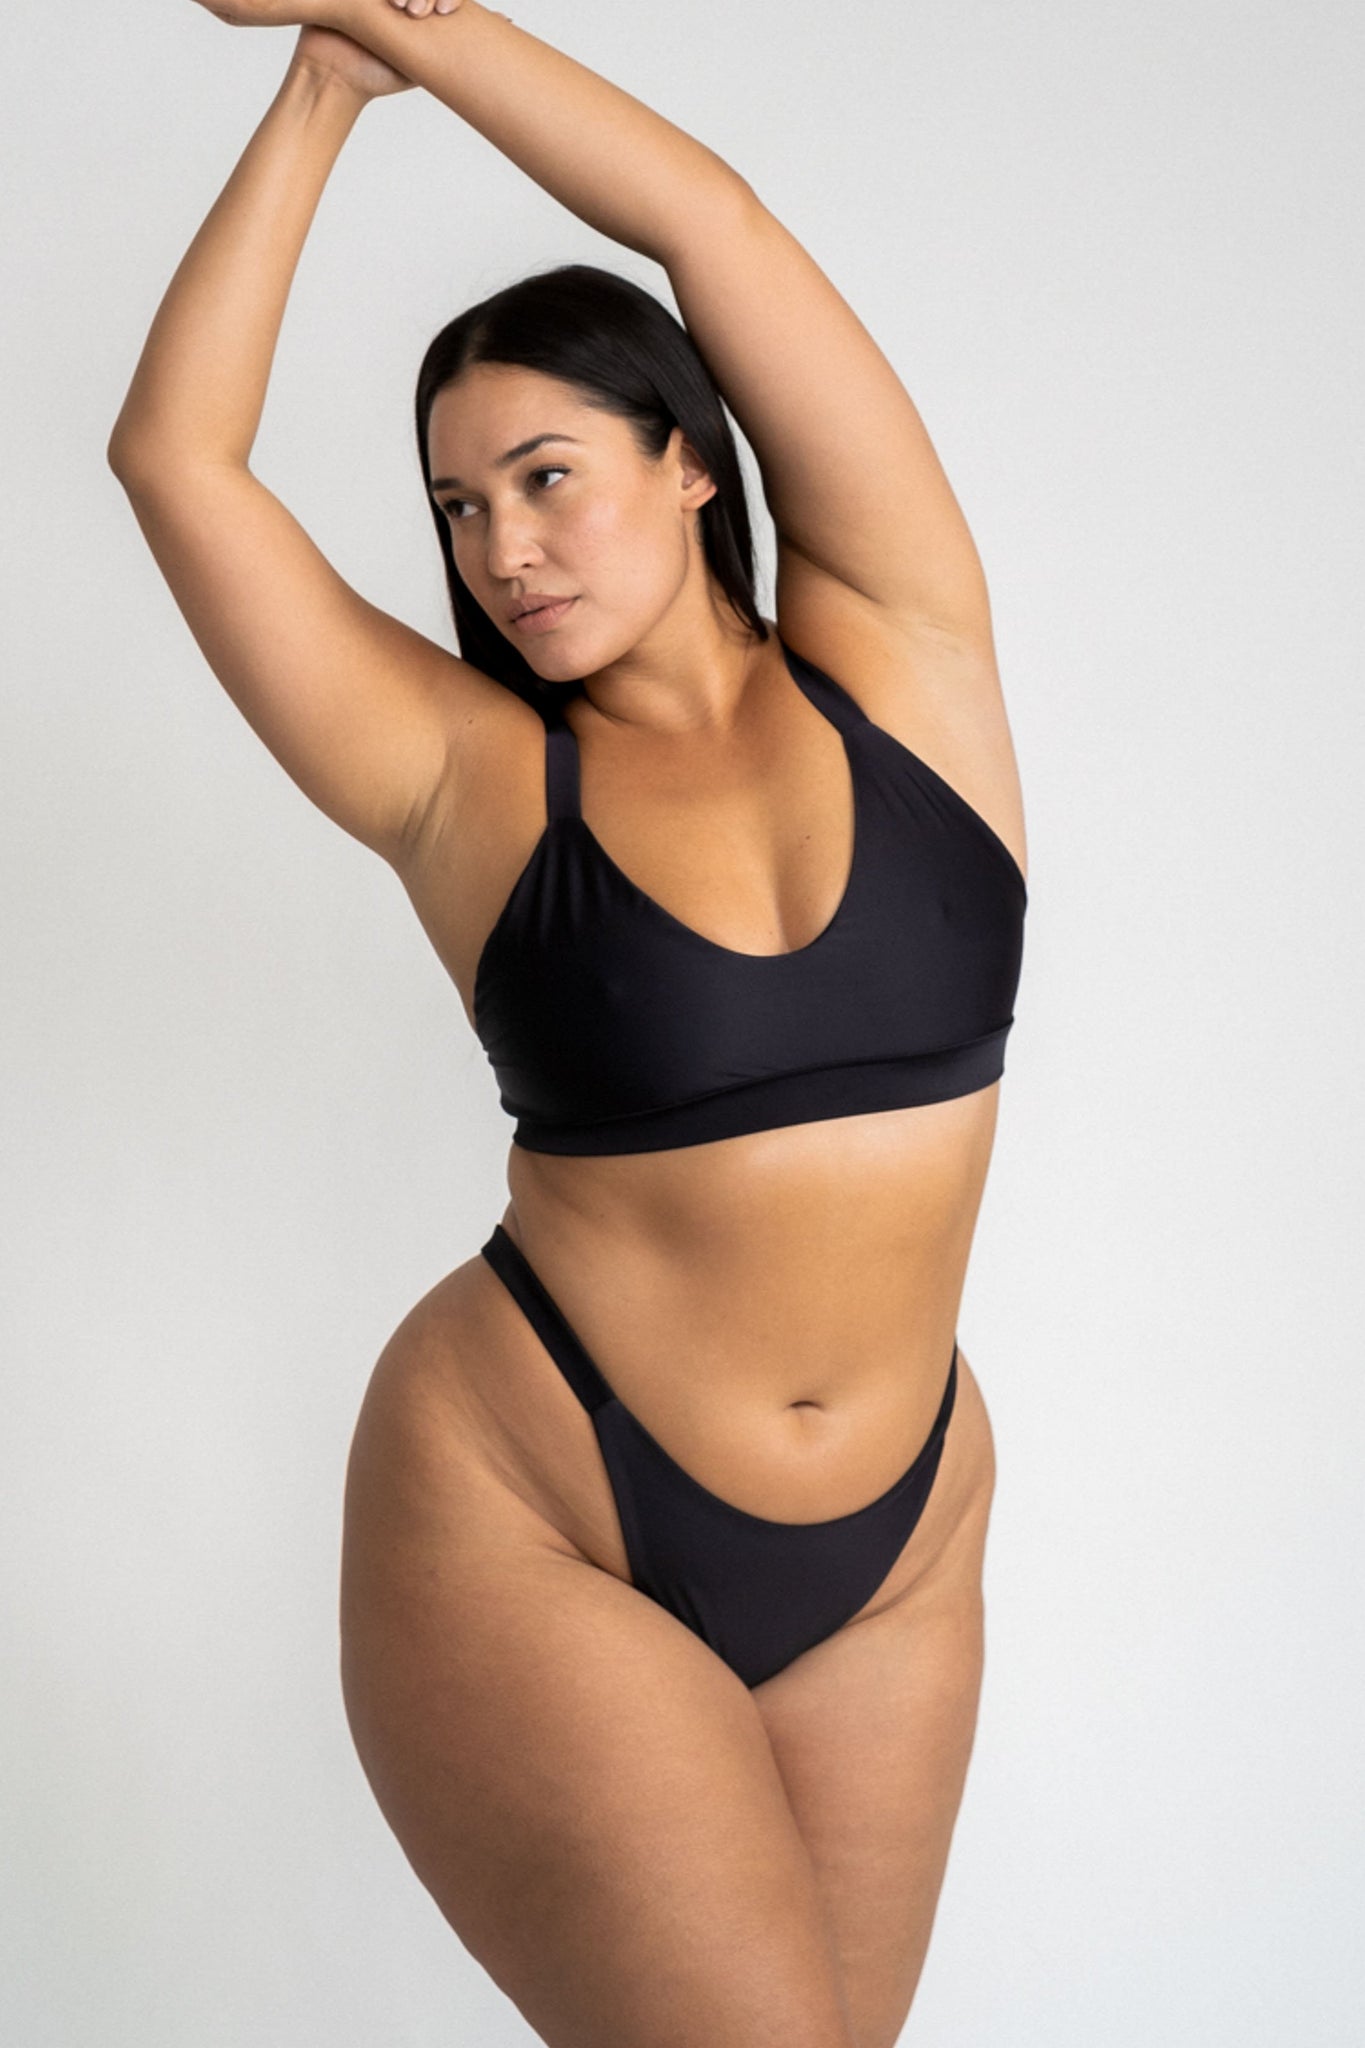 A woman standing with her arms above her head looking to the side wearing black high cut bikini bottoms and a matching black bikini top with a softly scooped neckline.